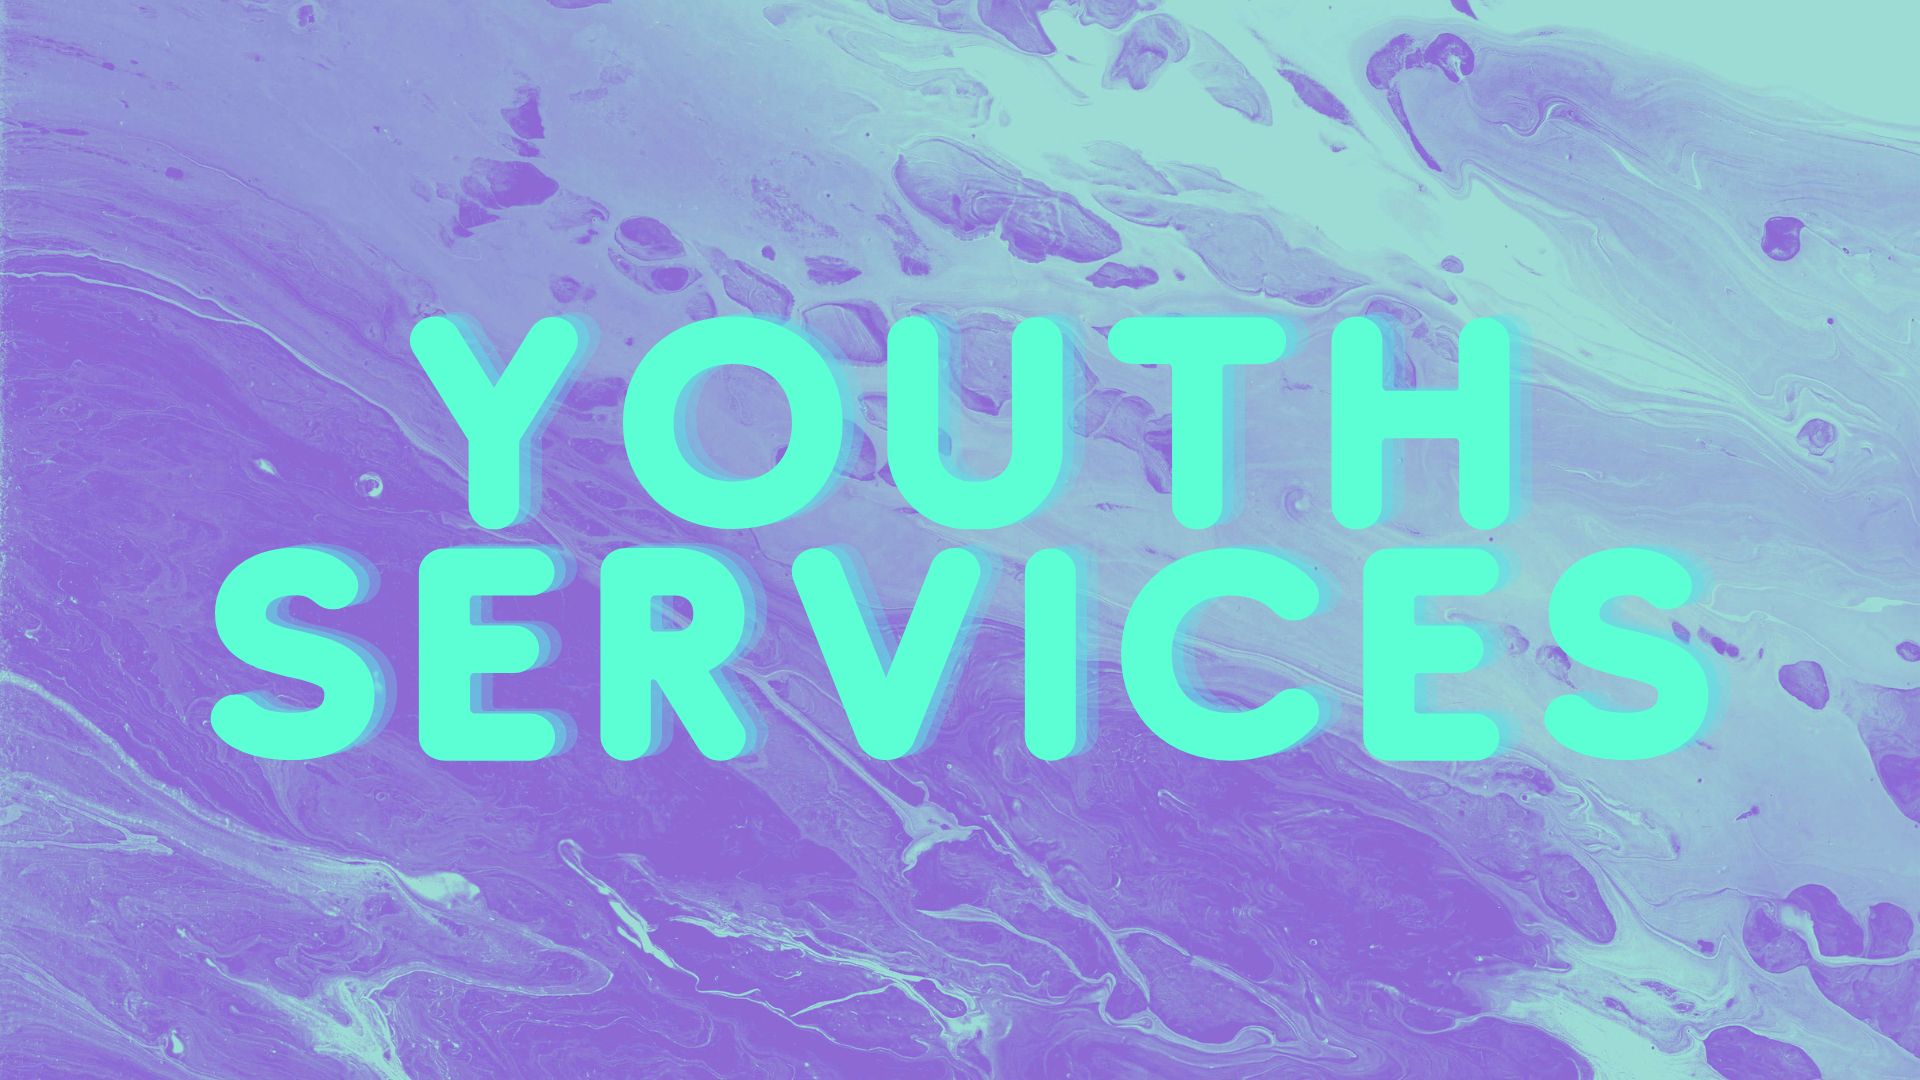 SCG YOUTH SERVICE